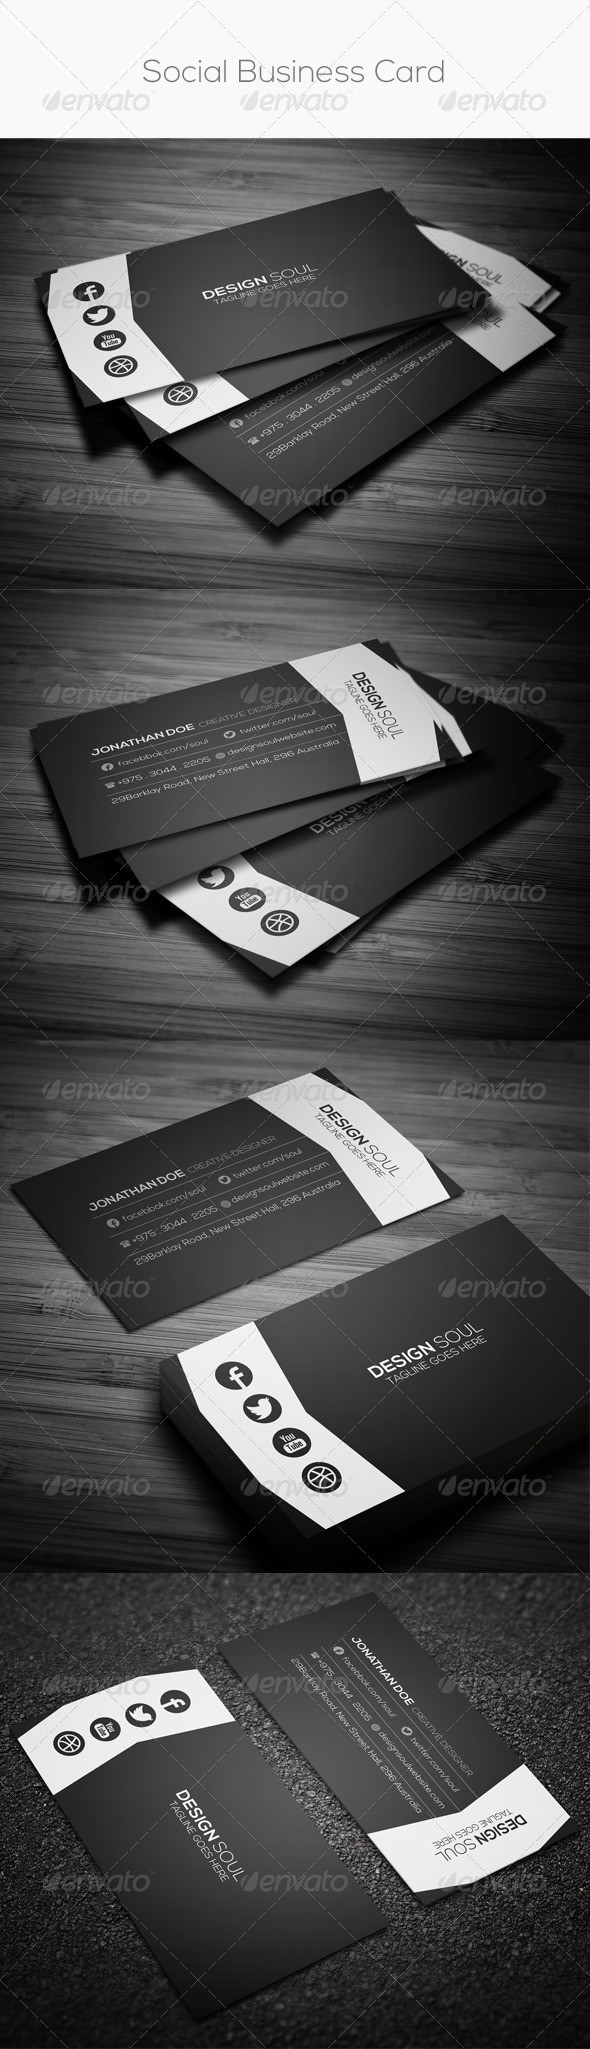 Social business card preview